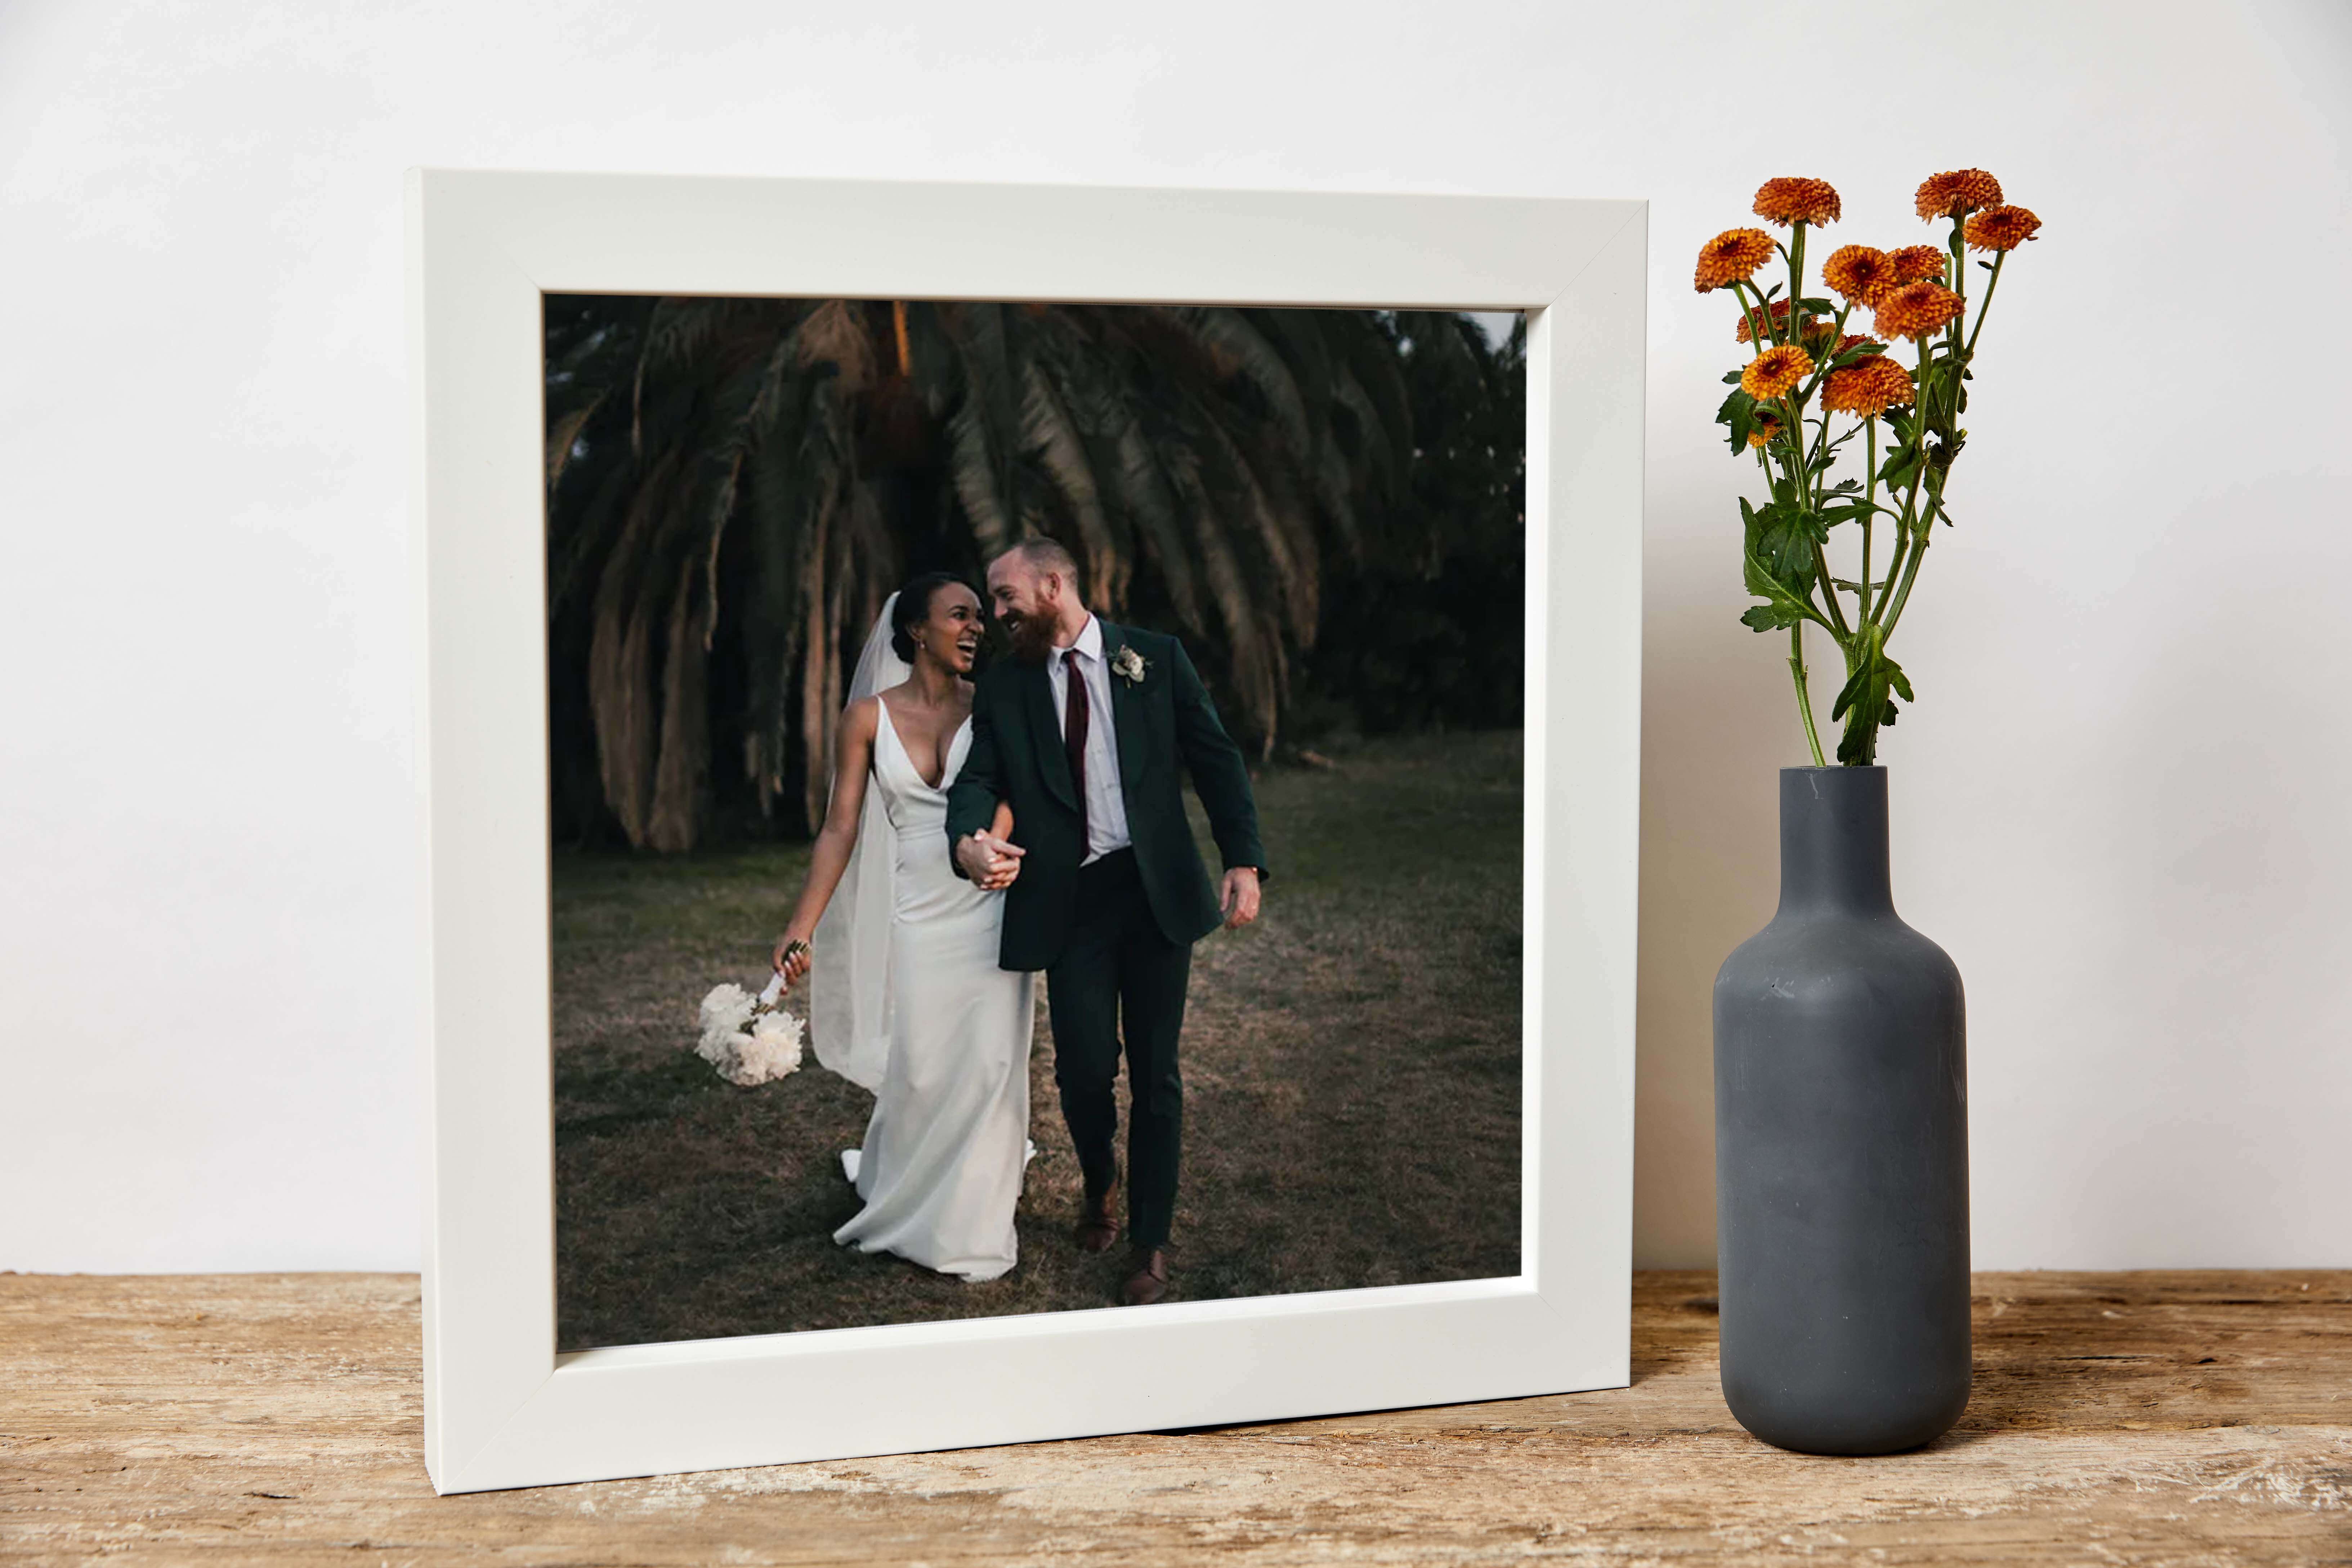 Print your beautiful wedding photos and display inside one of our stunning made to measure picture frames withtons of frame styles and mouldings to choose from